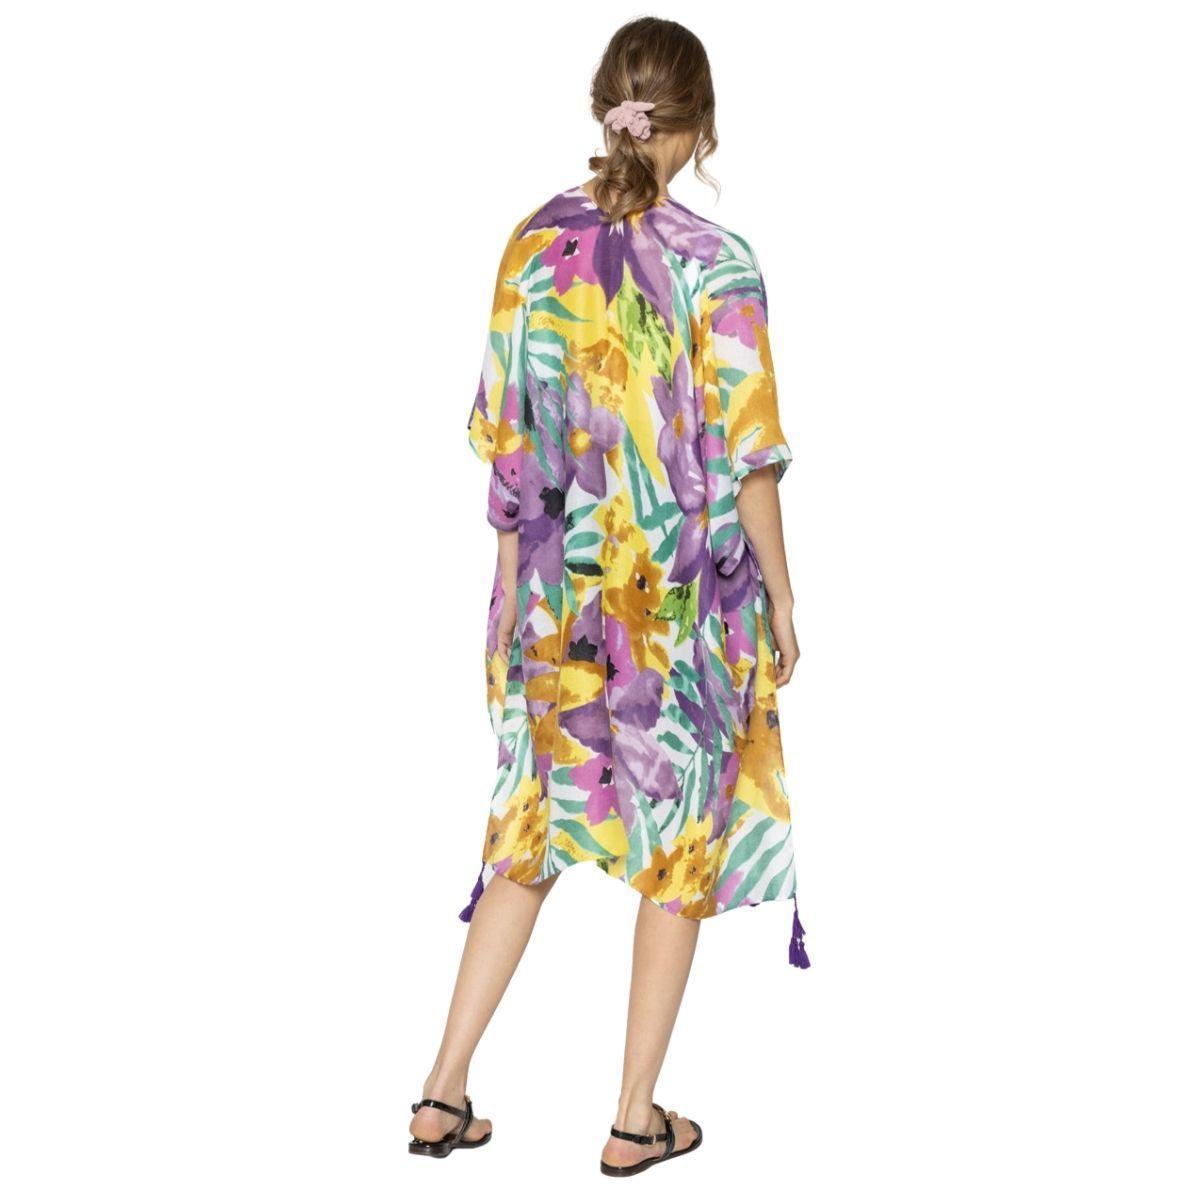 Get Ready for Spring with a Multicolor Tempera Floral Kimono - Shop Now!